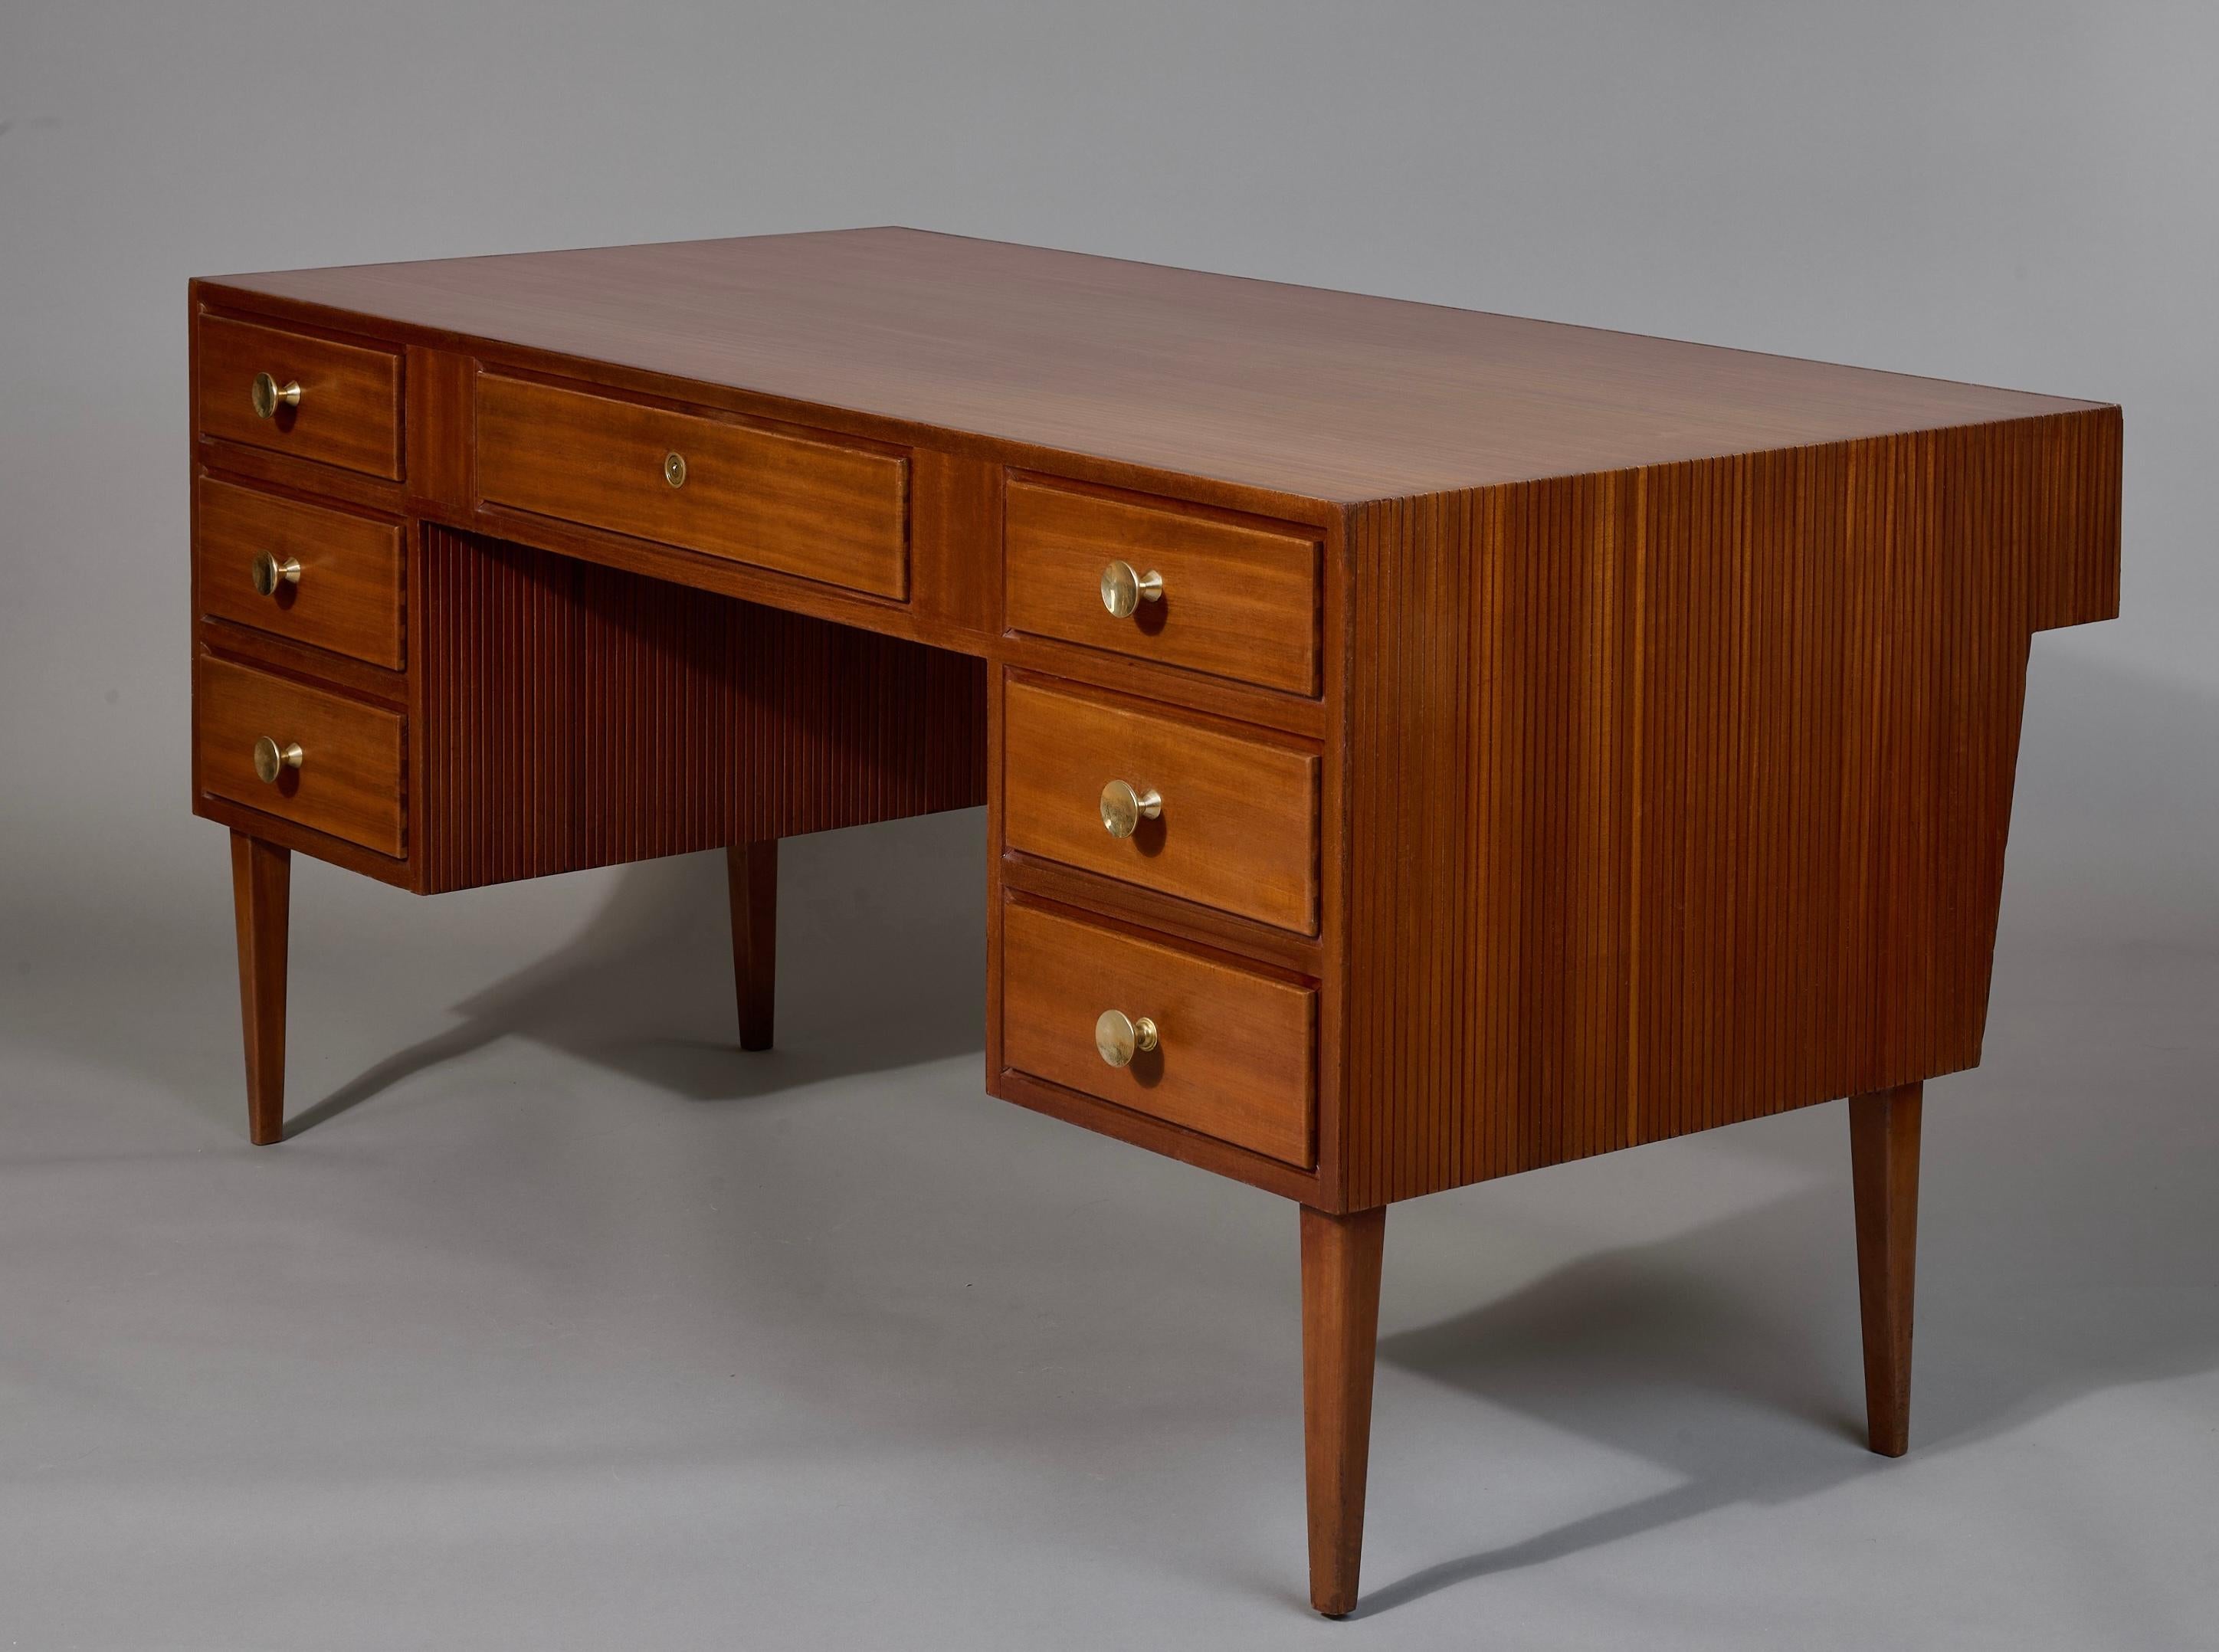 Mid-Century Modern Gio Ponti: Monumental Executive Desk in Reeded Walnut and Brass, Italy 1950s For Sale